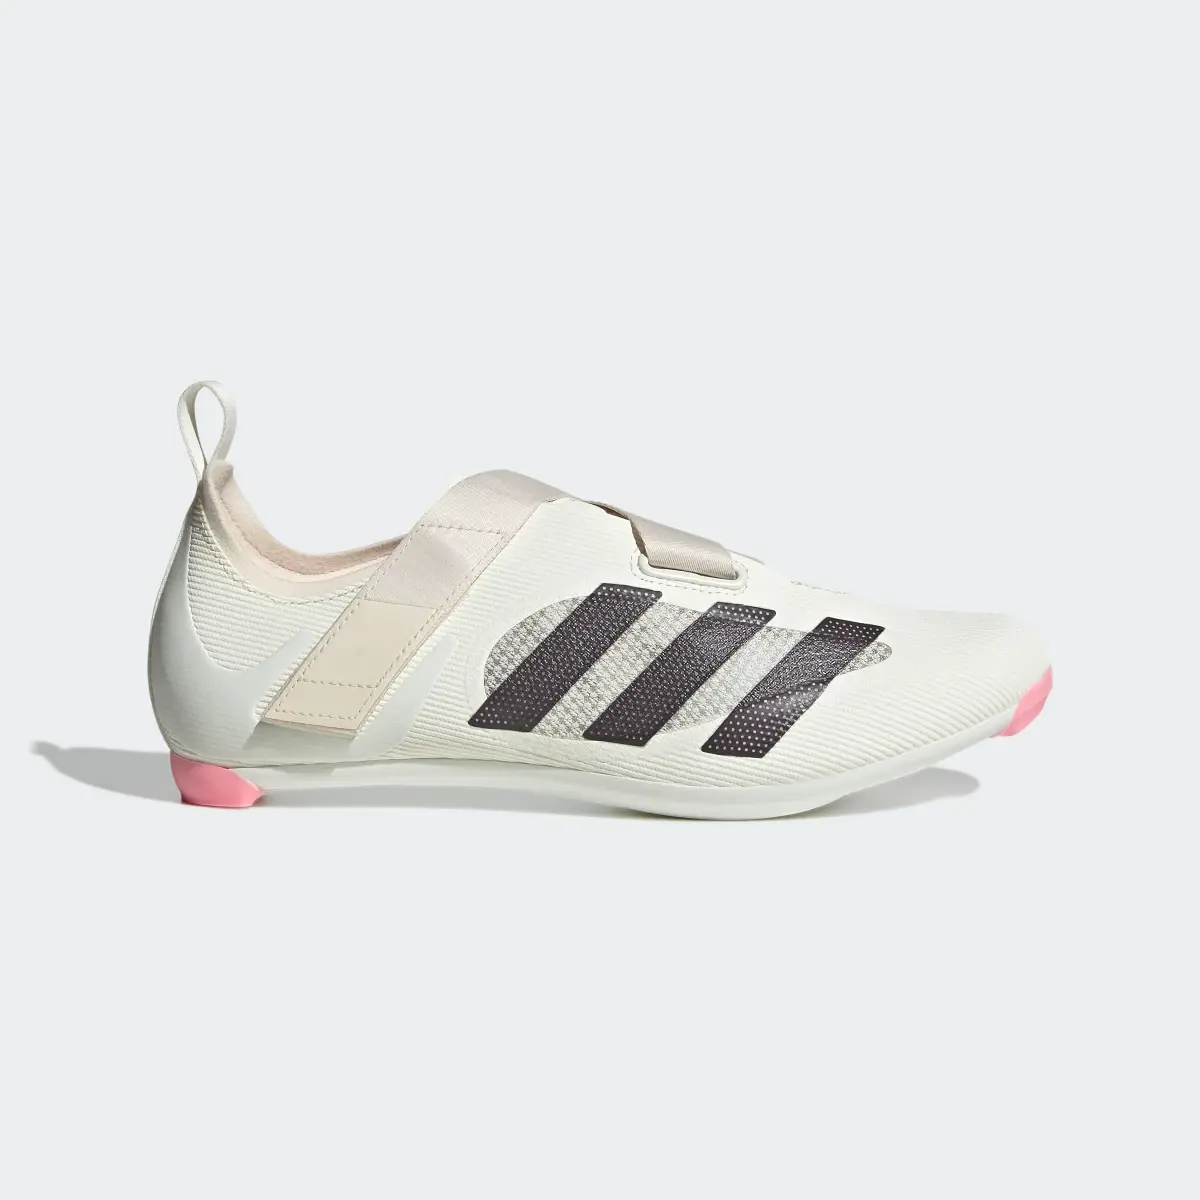 Adidas CHAUSSURE D'INDOOR CYCLING. 2